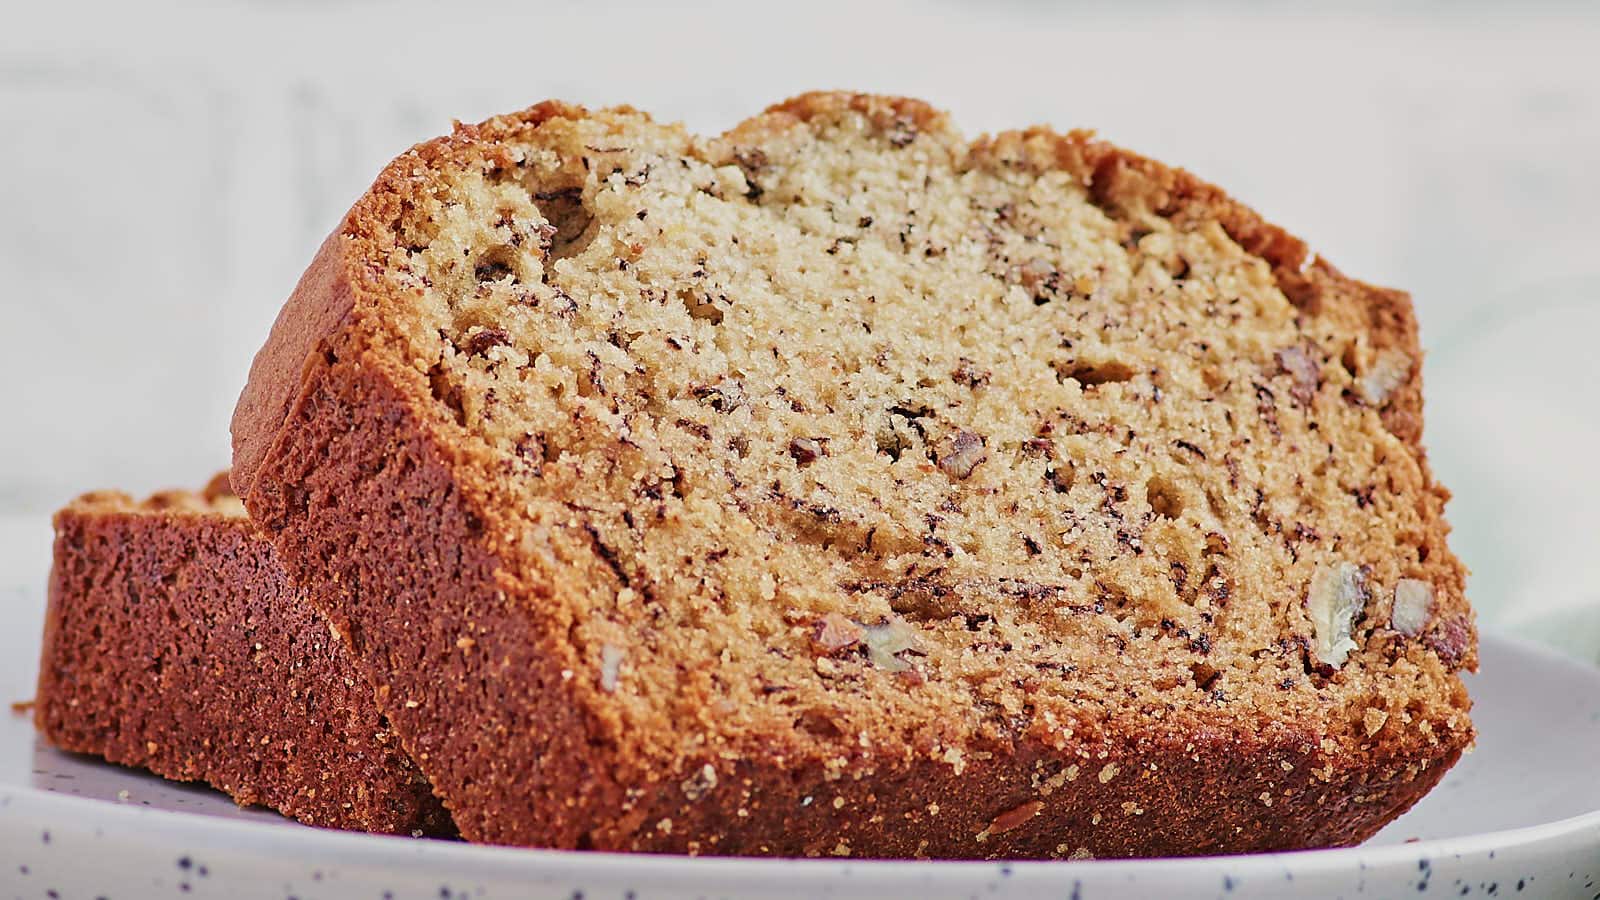 Banana Nut Bread recipe by Cheerful Cook.